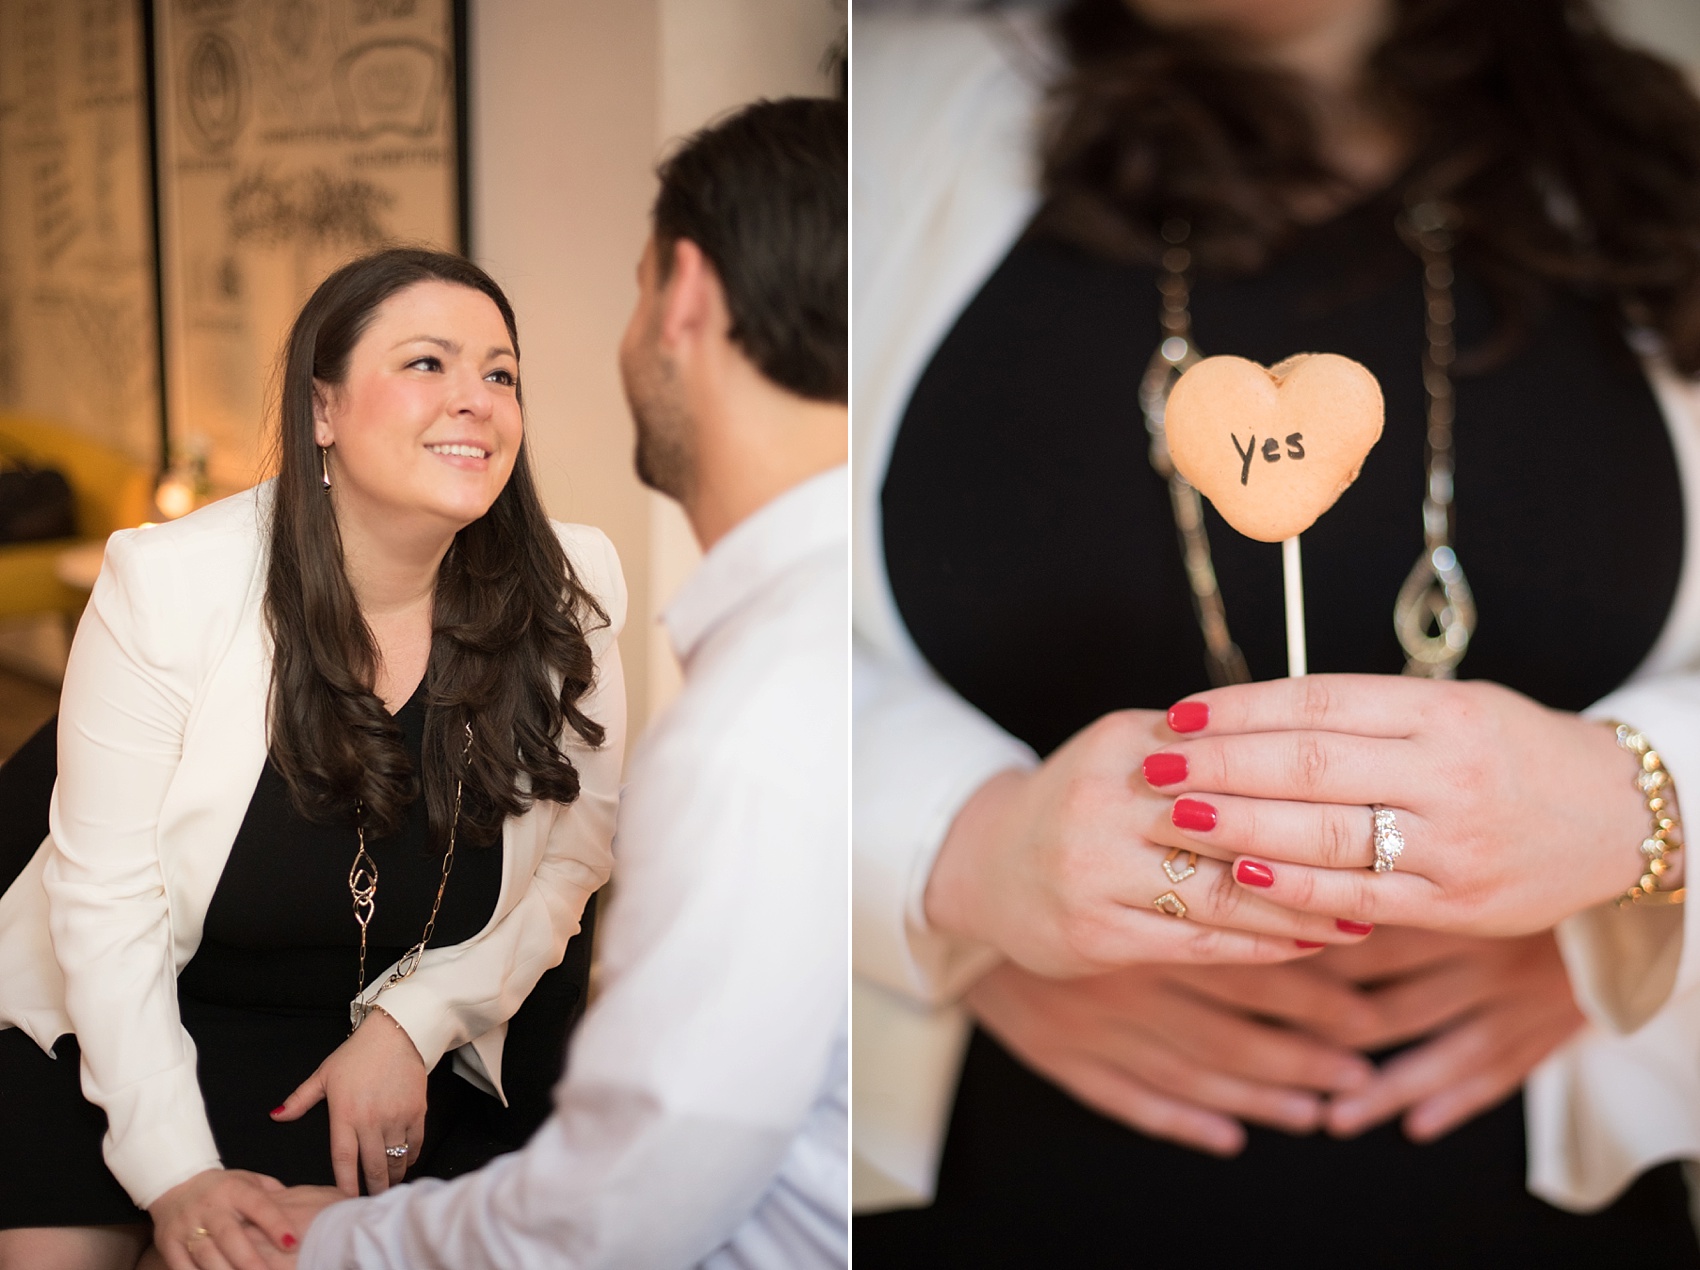 NYC Proposal in Chelsea, Haven's Kitchen. Photos by NYC wedding photographer Mikkel Paige.